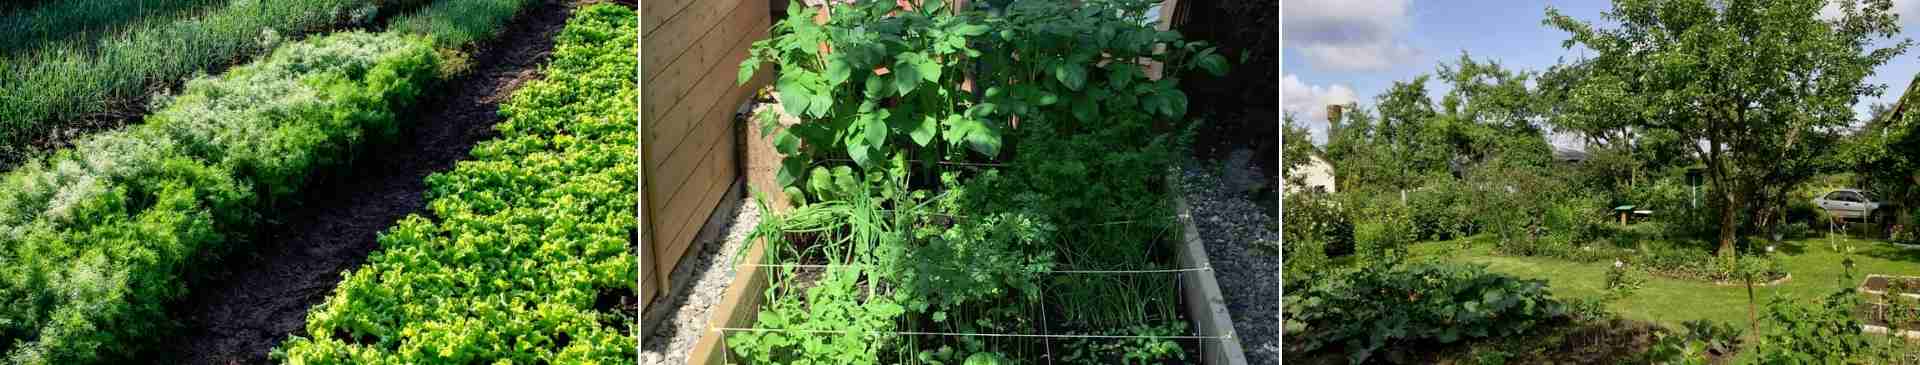 A Beginner's Guide to Veggie Growing in a Shady Garden